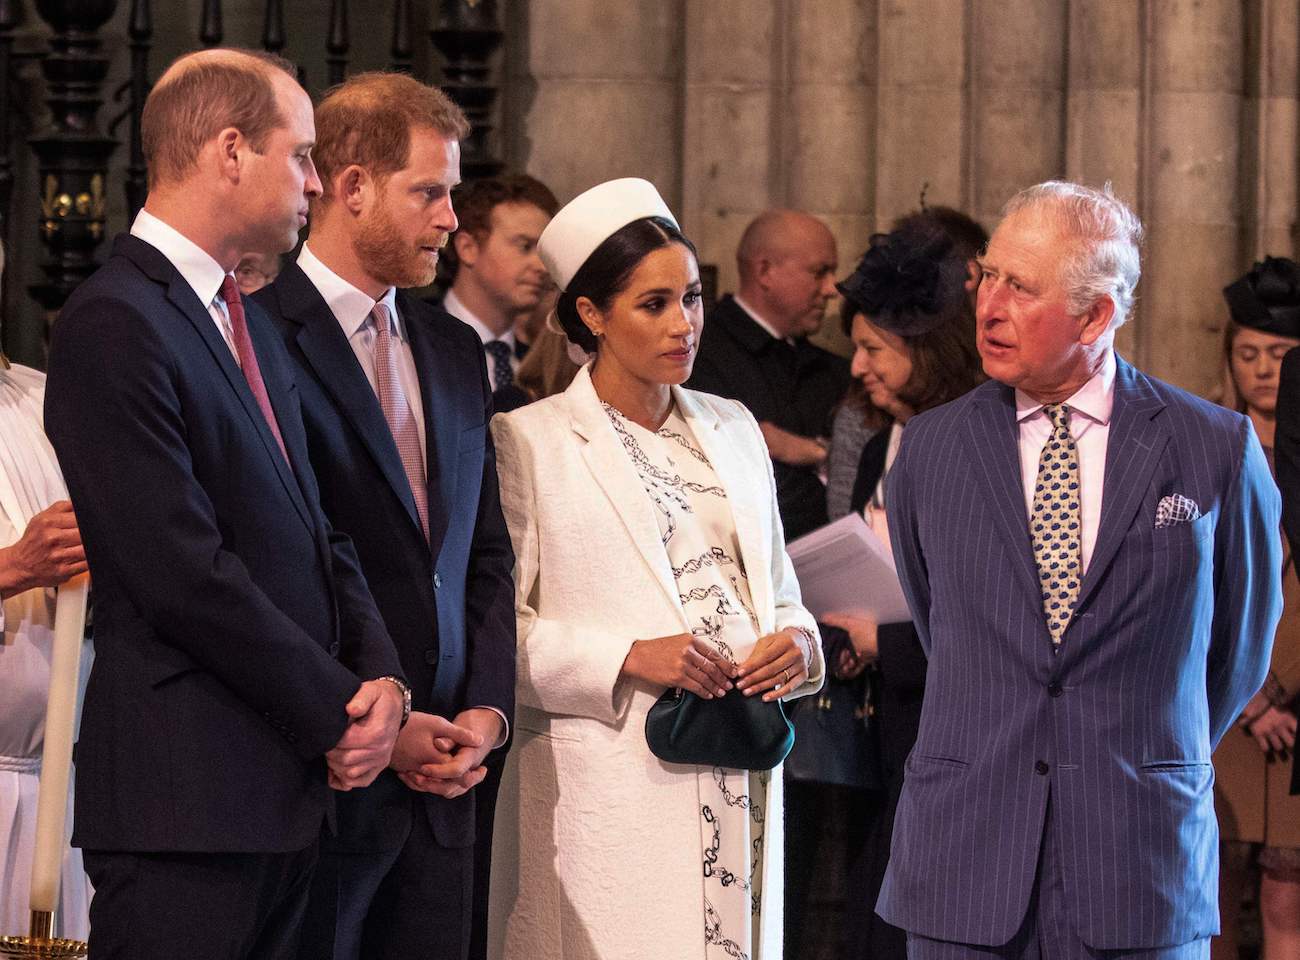 Prince William, Prince Harry, Meghan Markle, and Prince Charles talking to each other